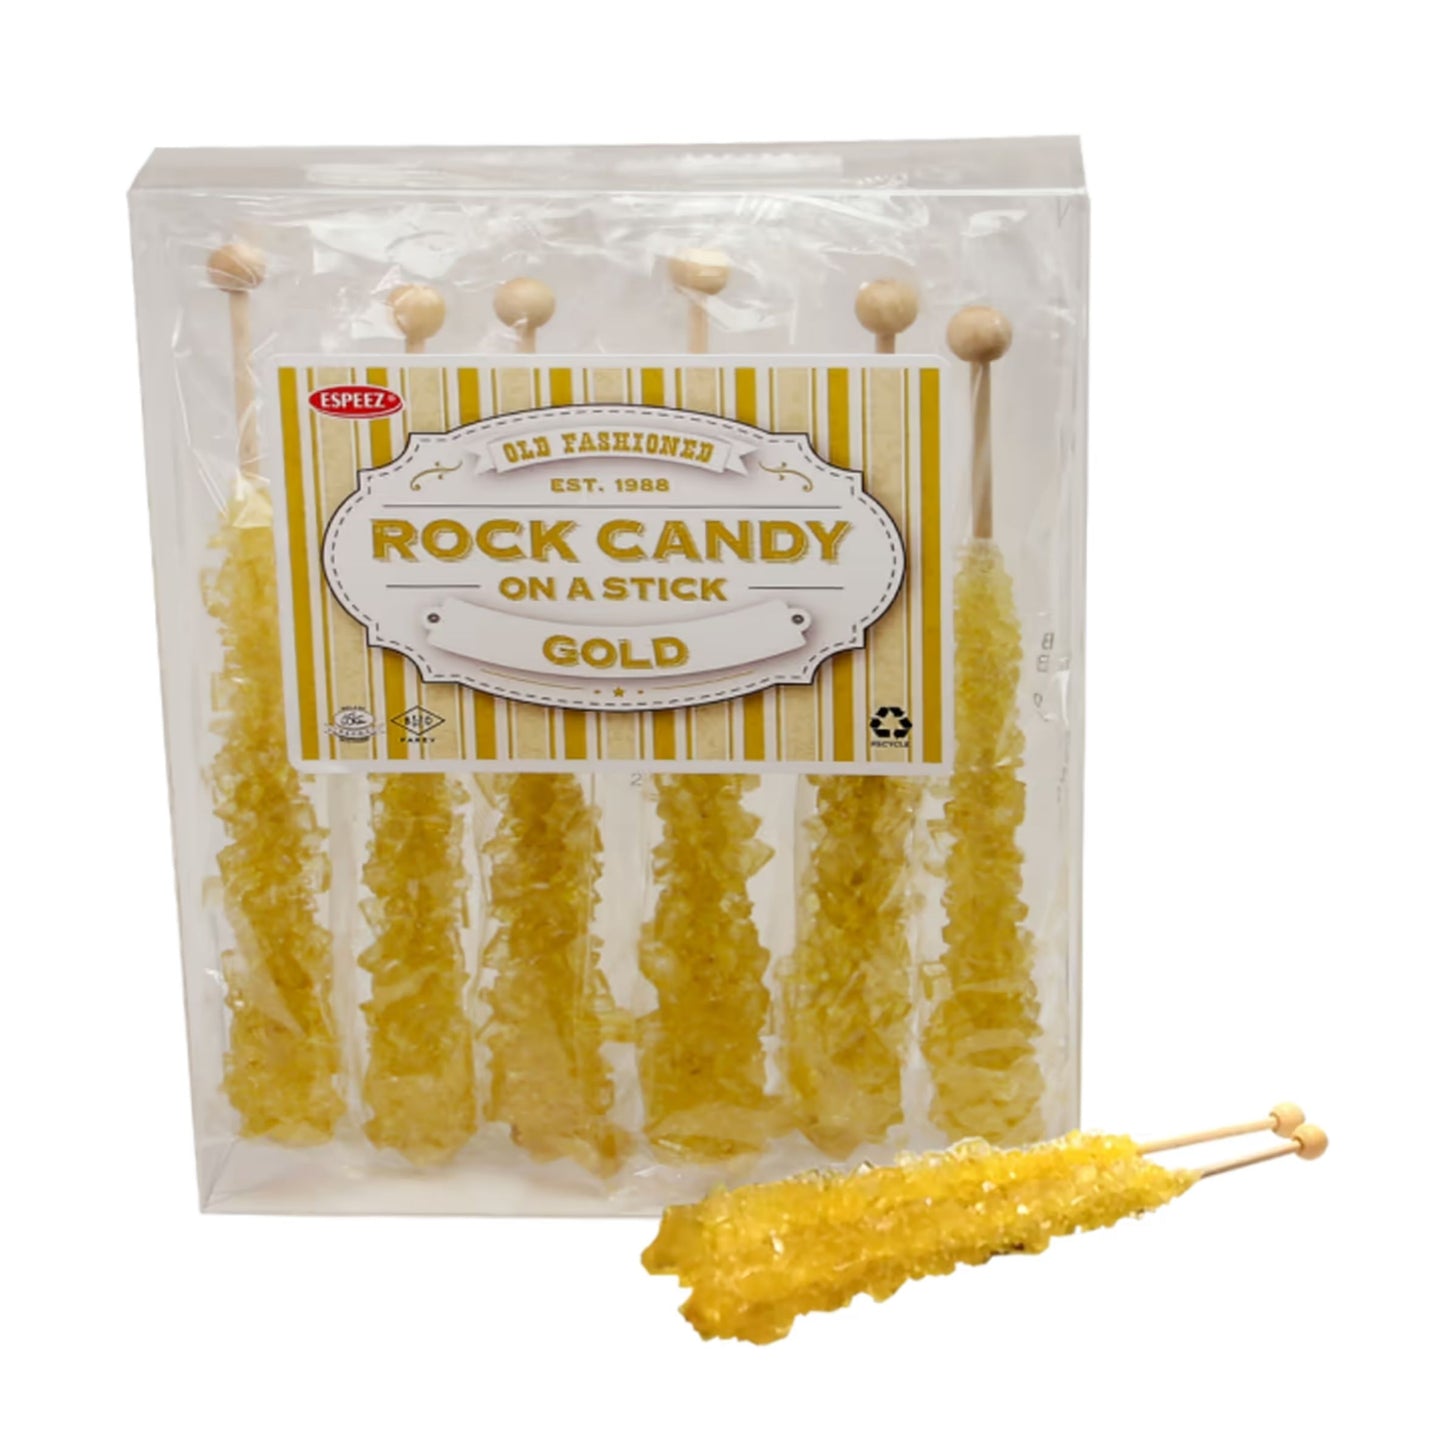 Rock Candy Acetate Boxes - 12ct